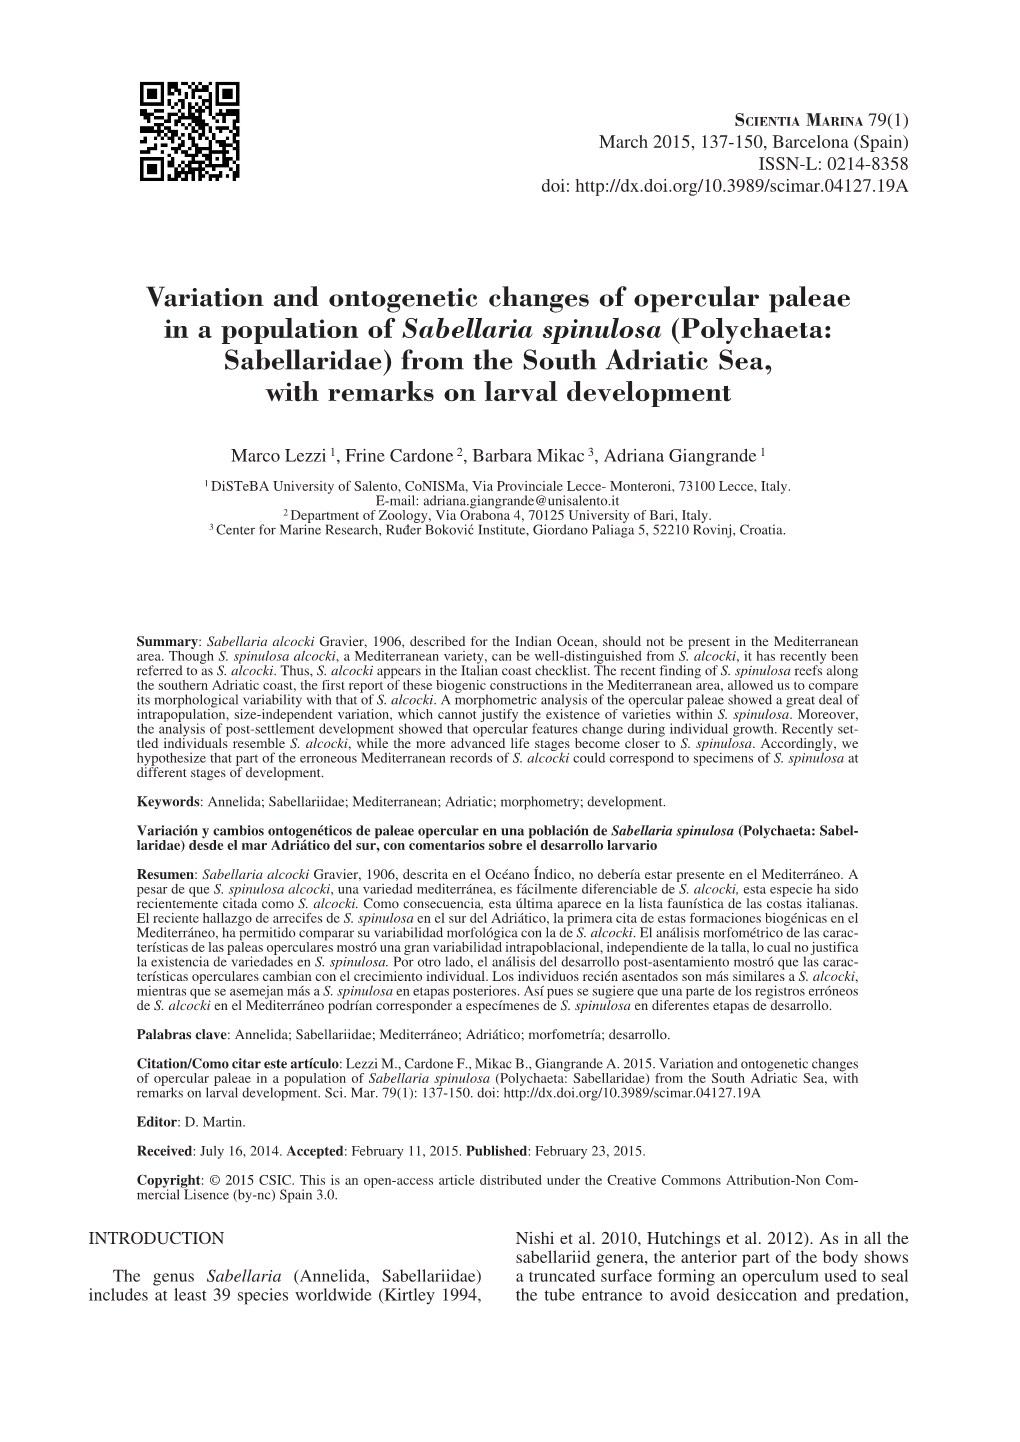 Variation and Ontogenetic Changes of Opercular Paleae in a Population Of